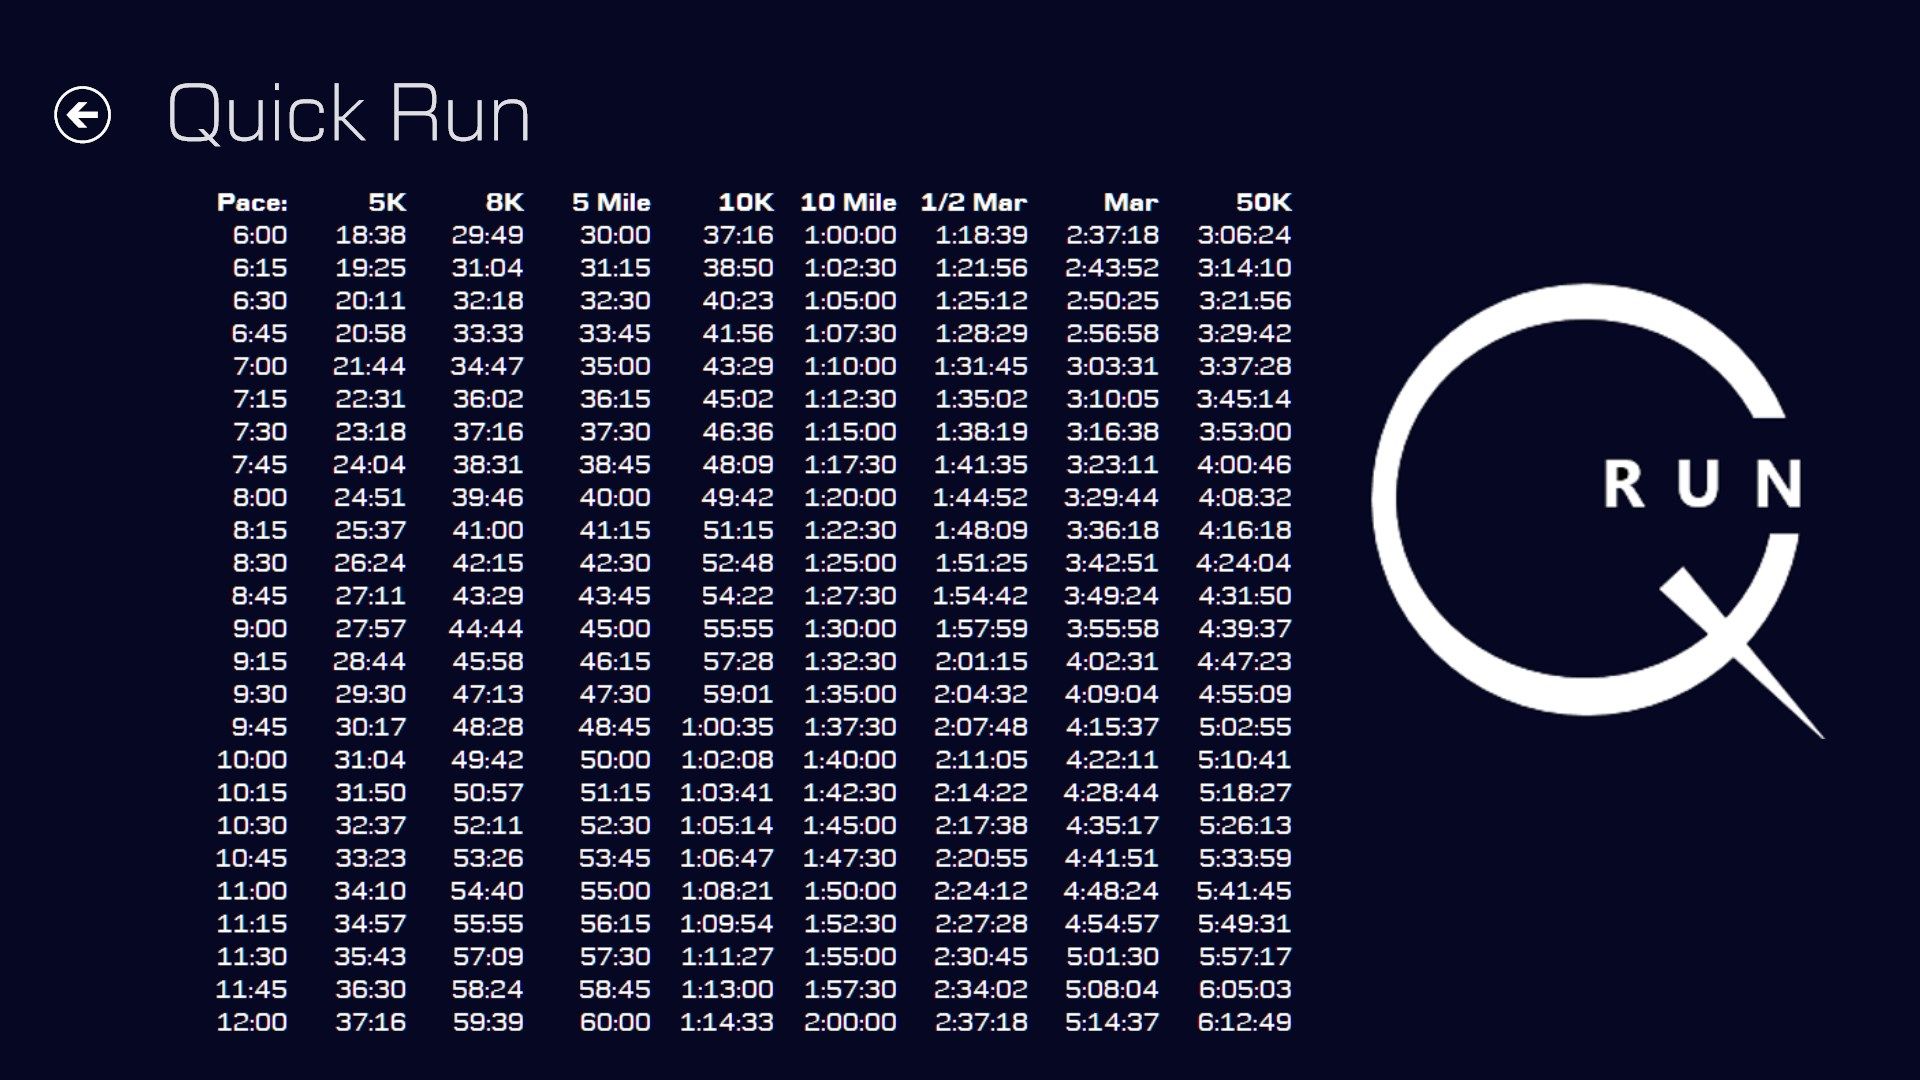 Pace Chart - Quickly reference the finish time for various paces and distances